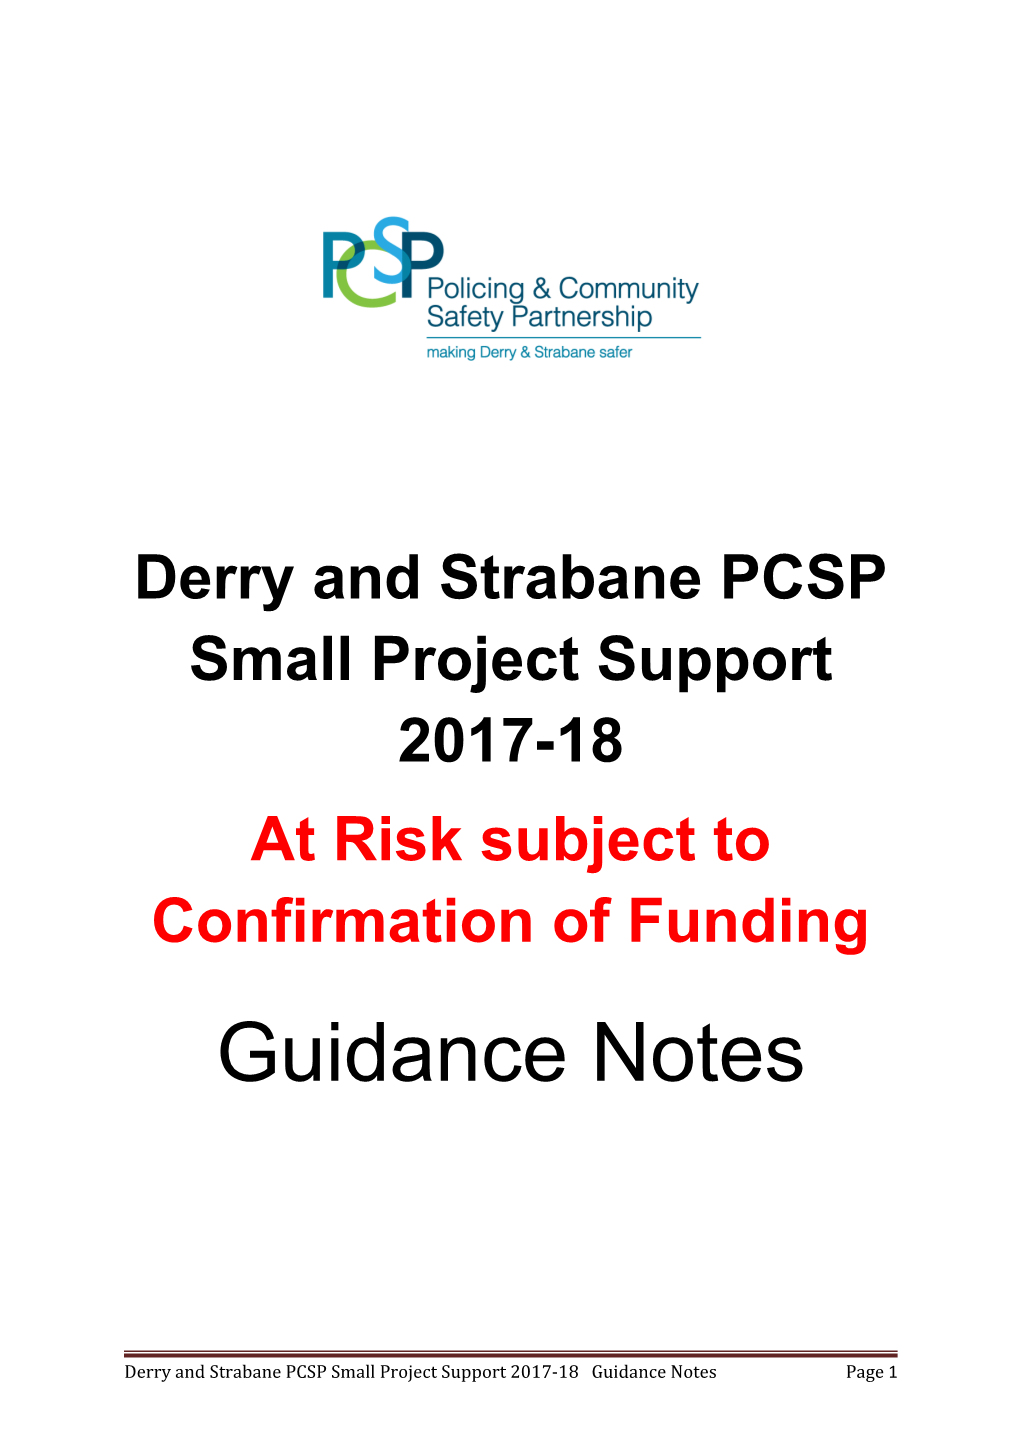 Derry and Strabane PCSP Small Project Support 2017-18